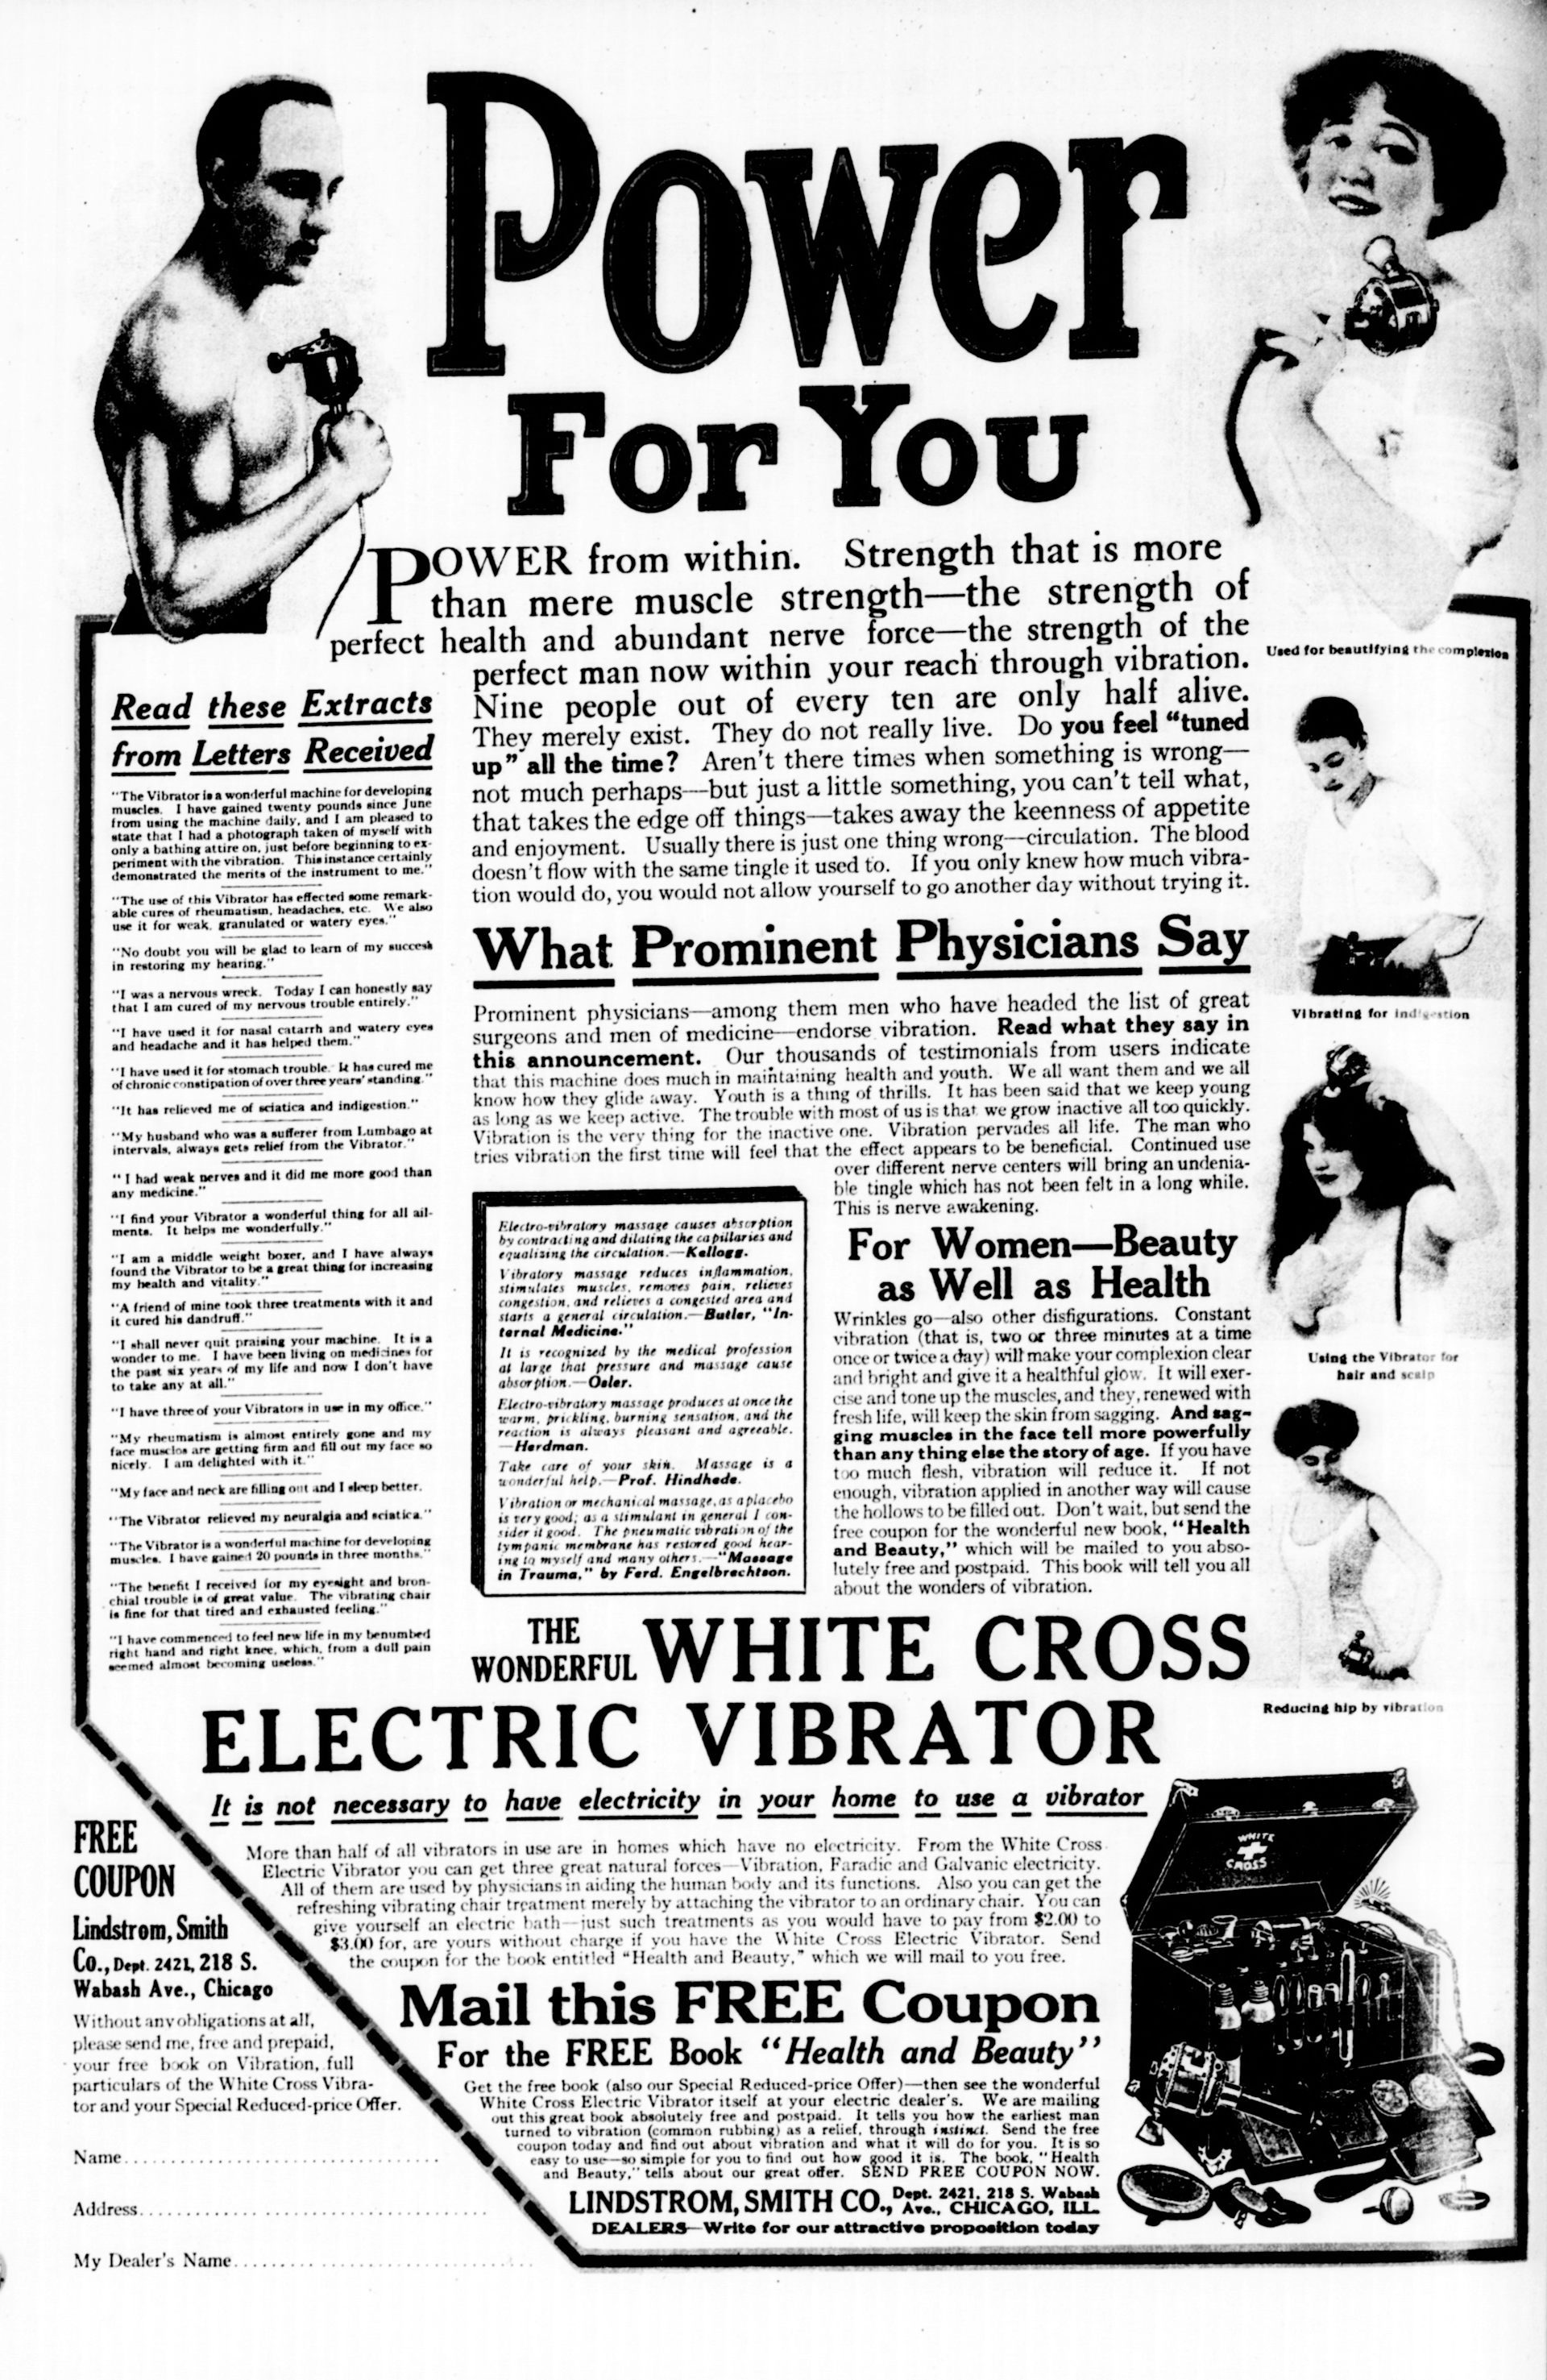 Vibrators had a long history as medical quackery before feminists rebranded them as sex toys